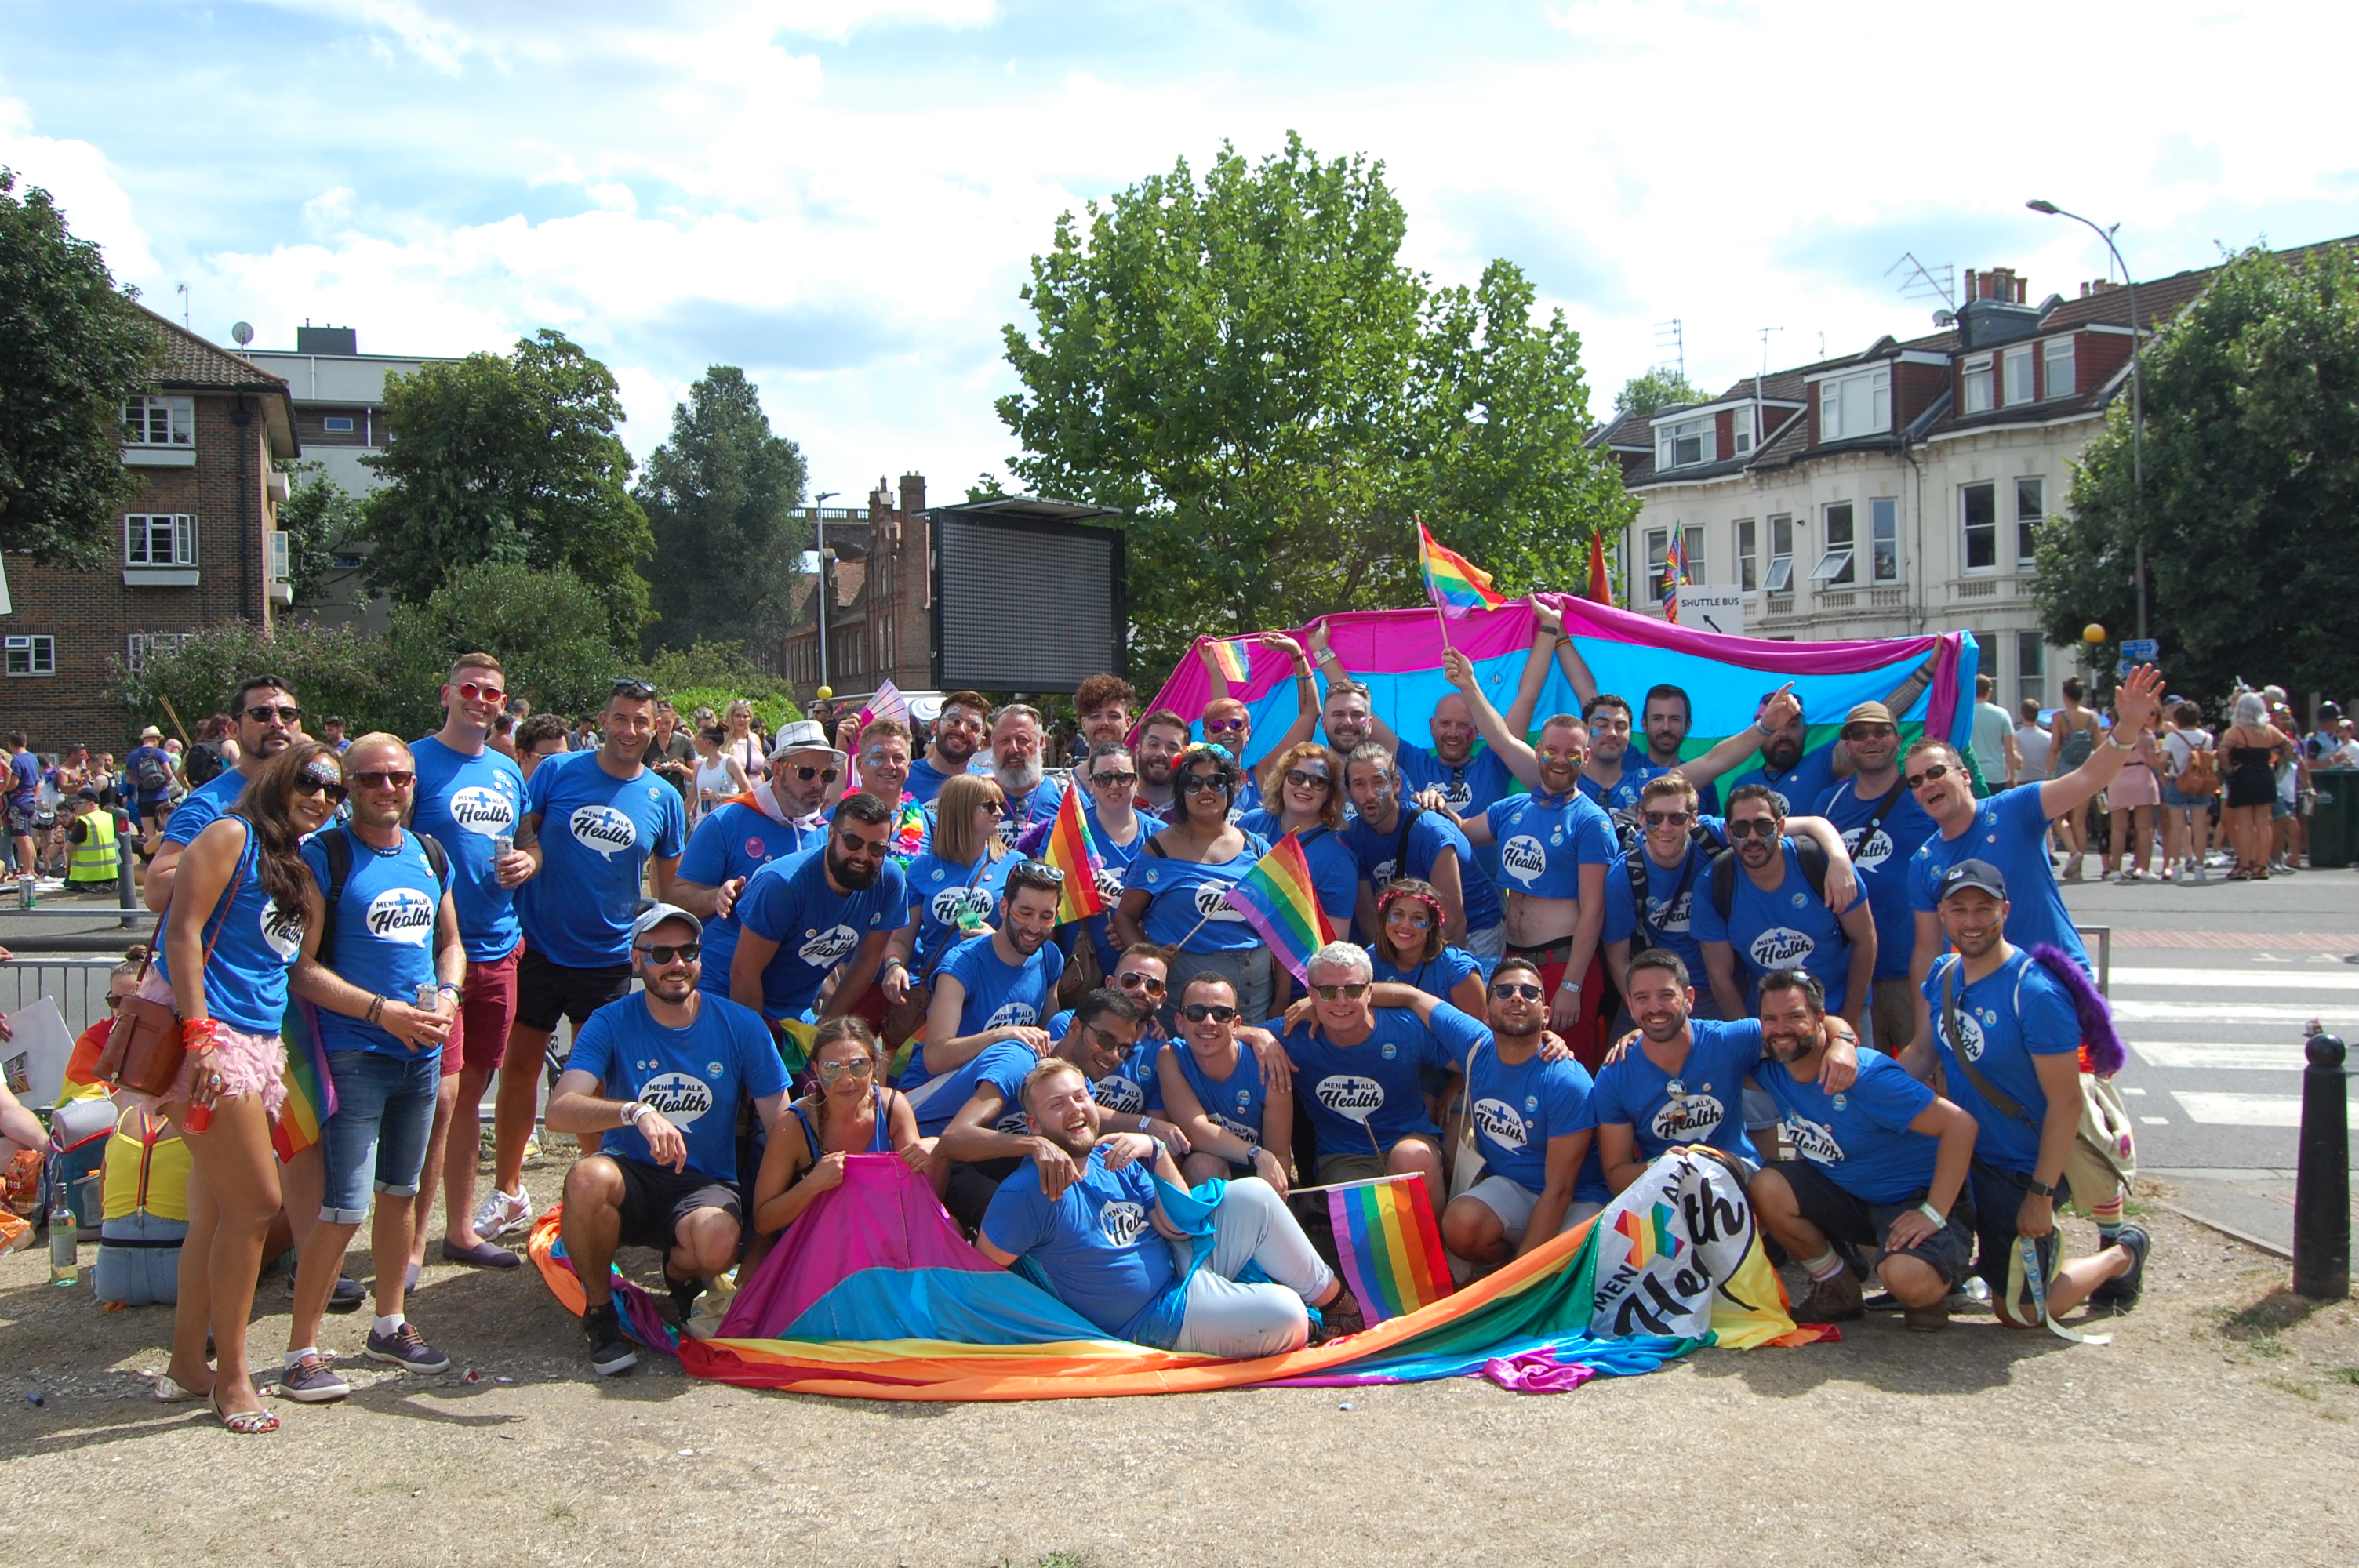 Northstar IT supporting MenTalkHealth UK charity at Brighton Pride 2019 team photo.